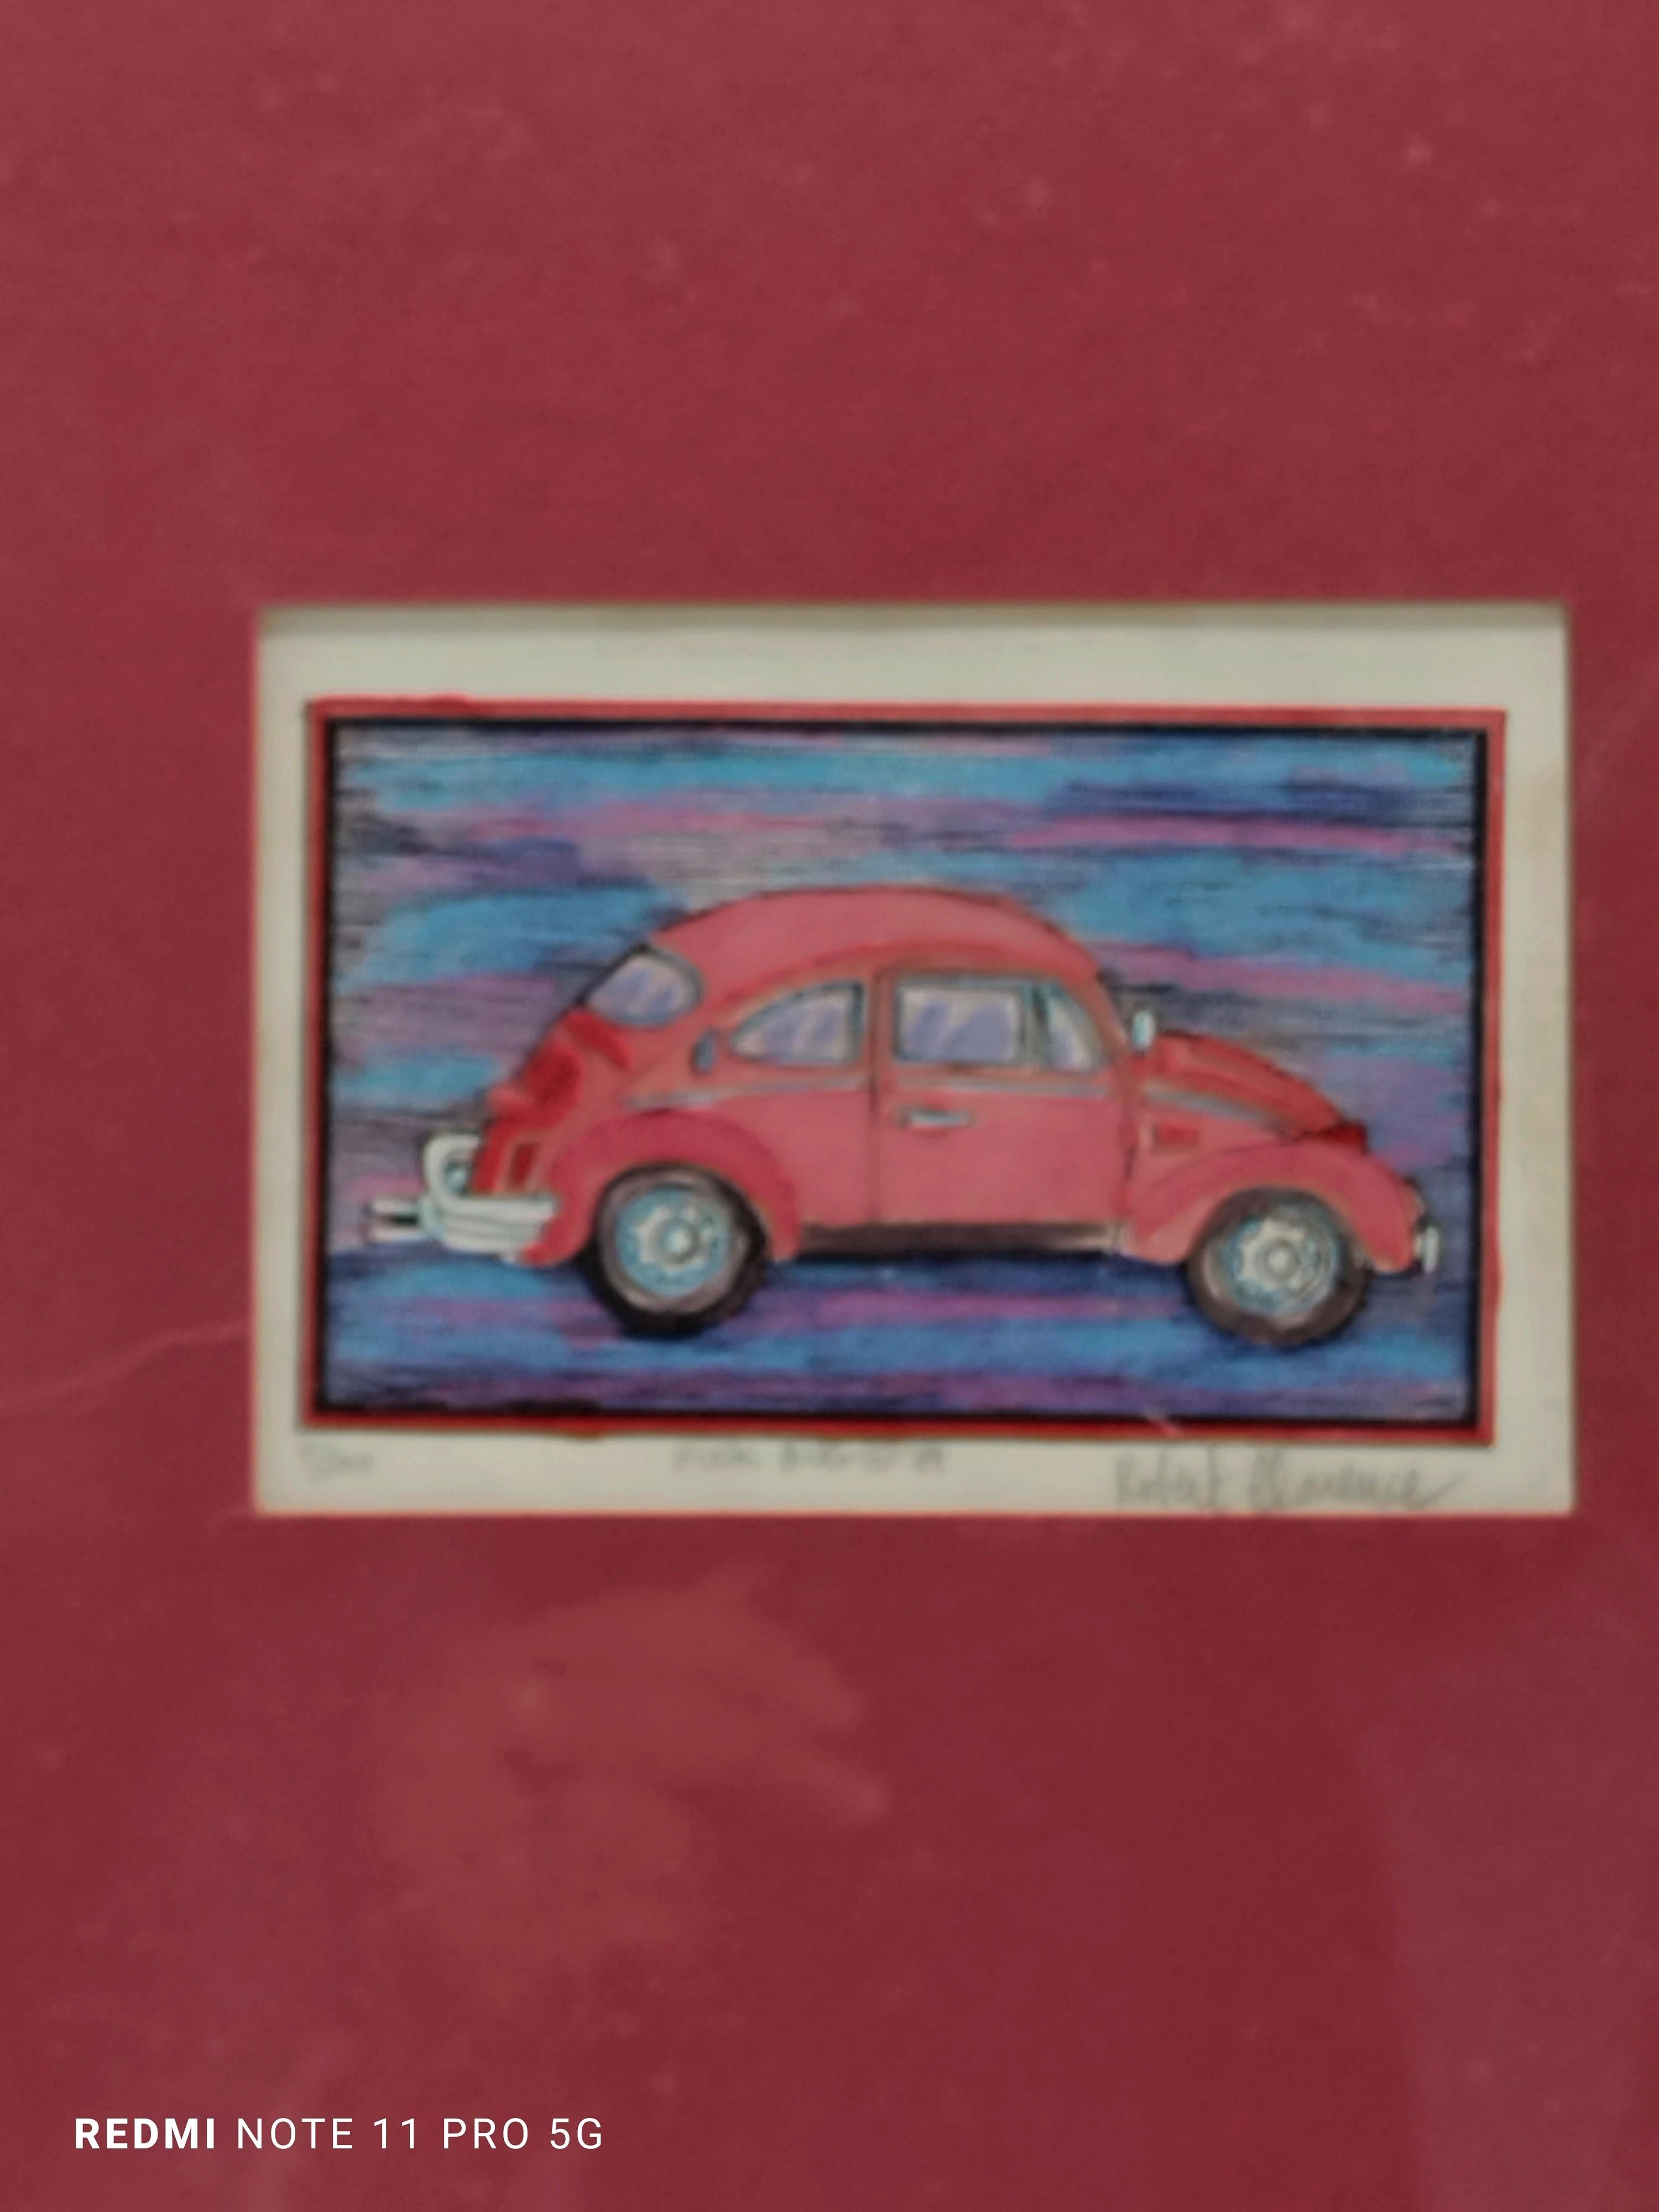 PINK BUG - Ink drawing by Robert Clarence, 1989 - Modern Art by Unknown